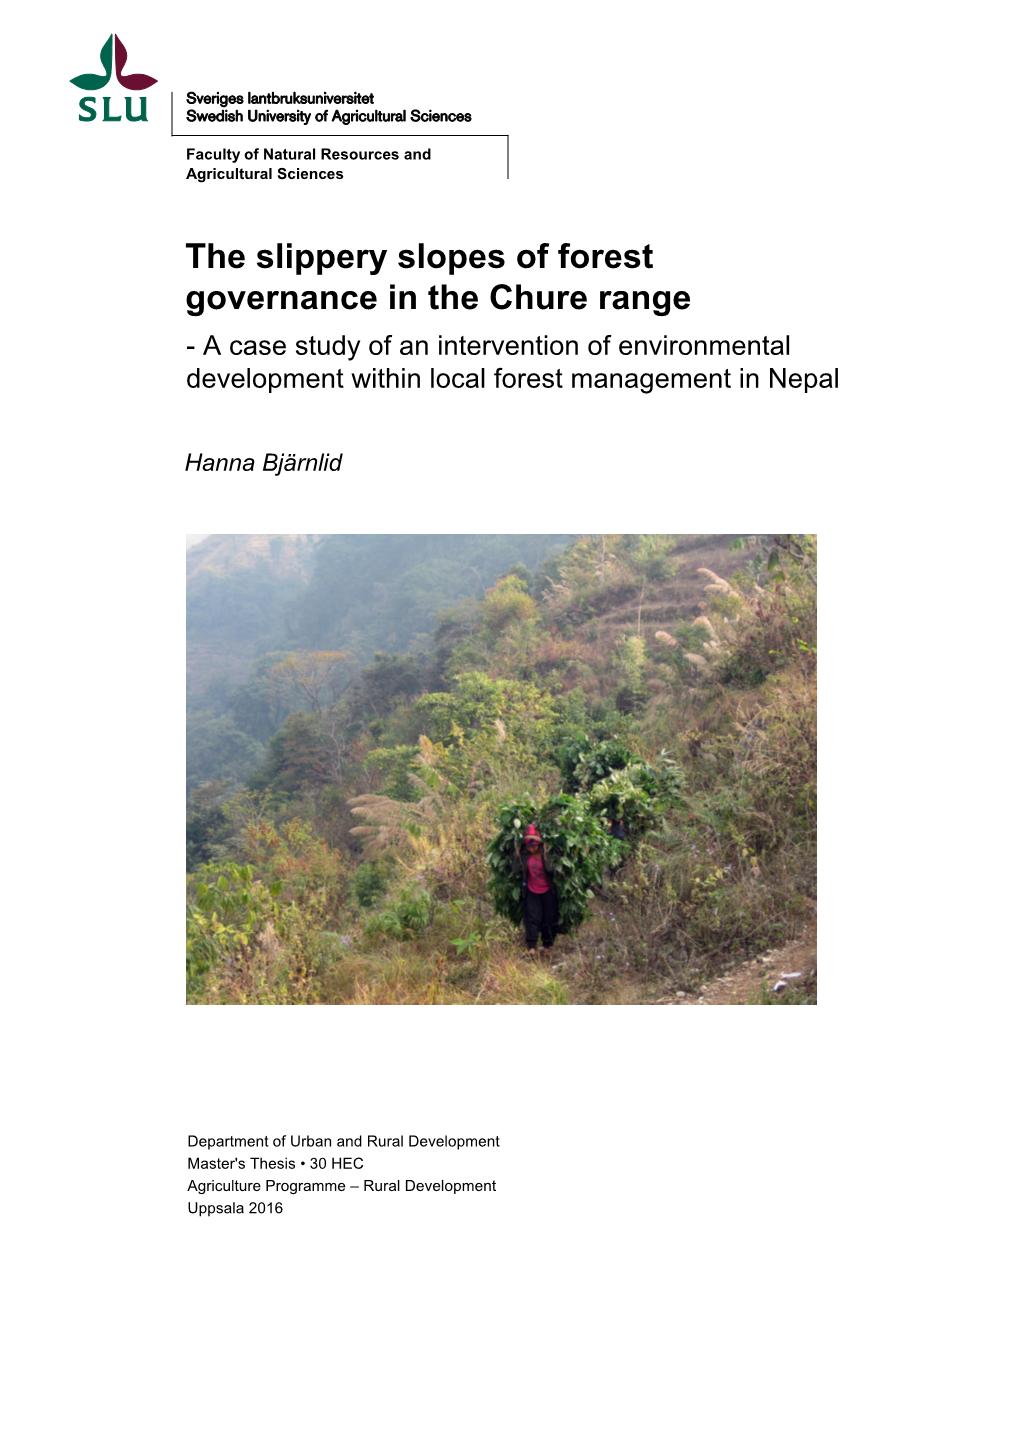 The Slippery Slopes of Forest Governance in the Chure Range - a Case Study of an Intervention of Environmental Development Within Local Forest Management in Nepal